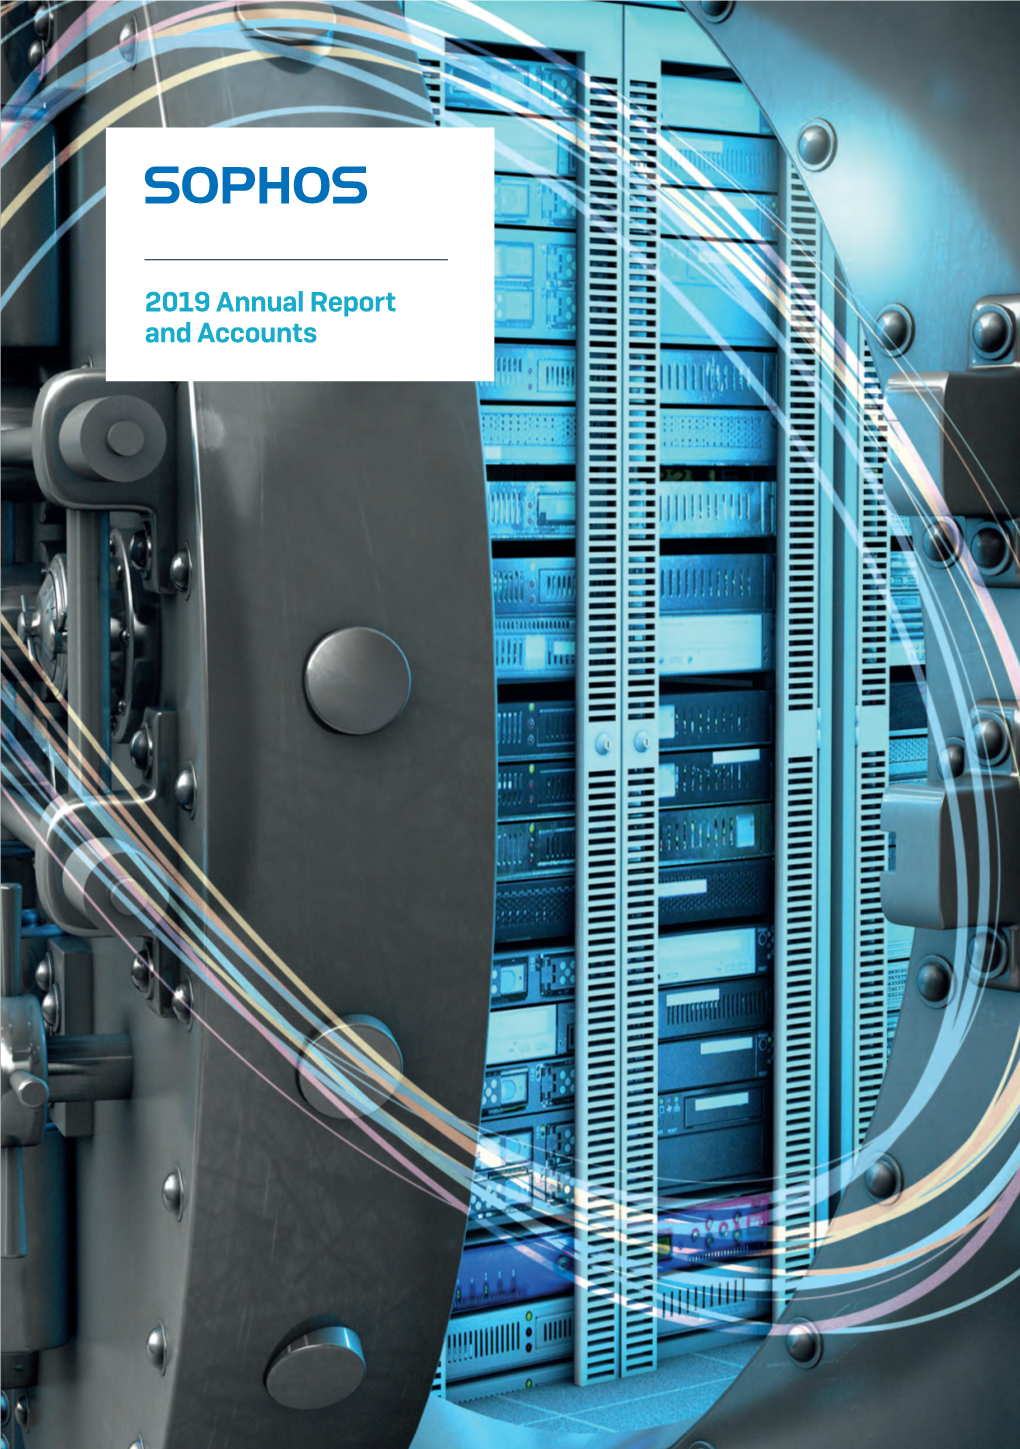 2019 Annual Report and Accounts 2019 Annual Report and Ac and Report Annual 2019 Counts